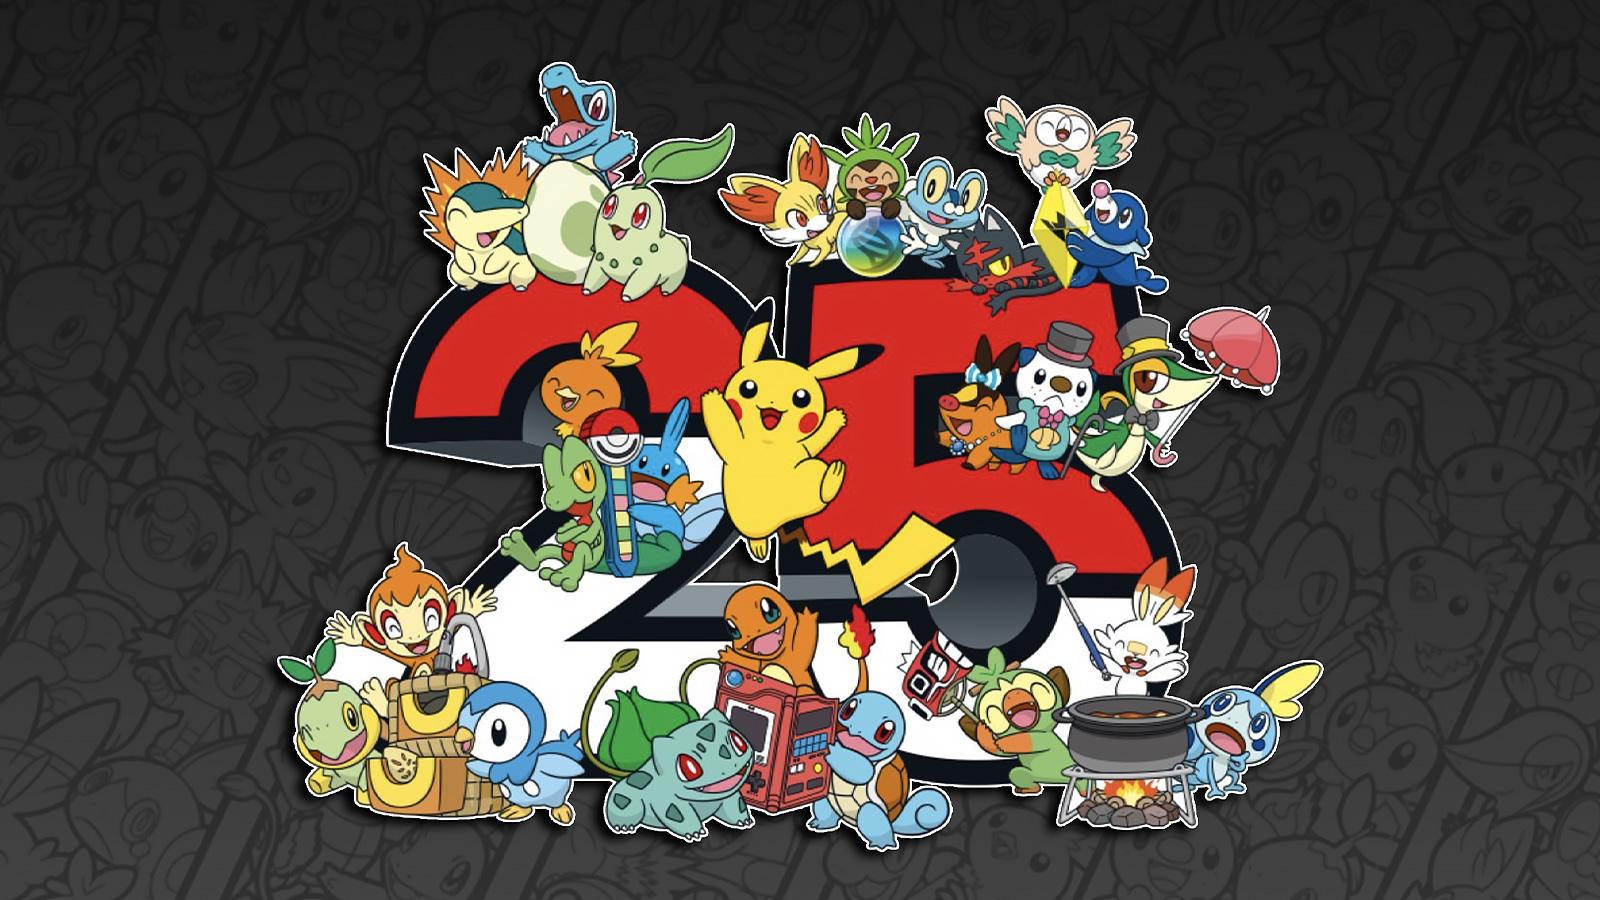 Pokémon 25th Anniversary - What new games have been announced